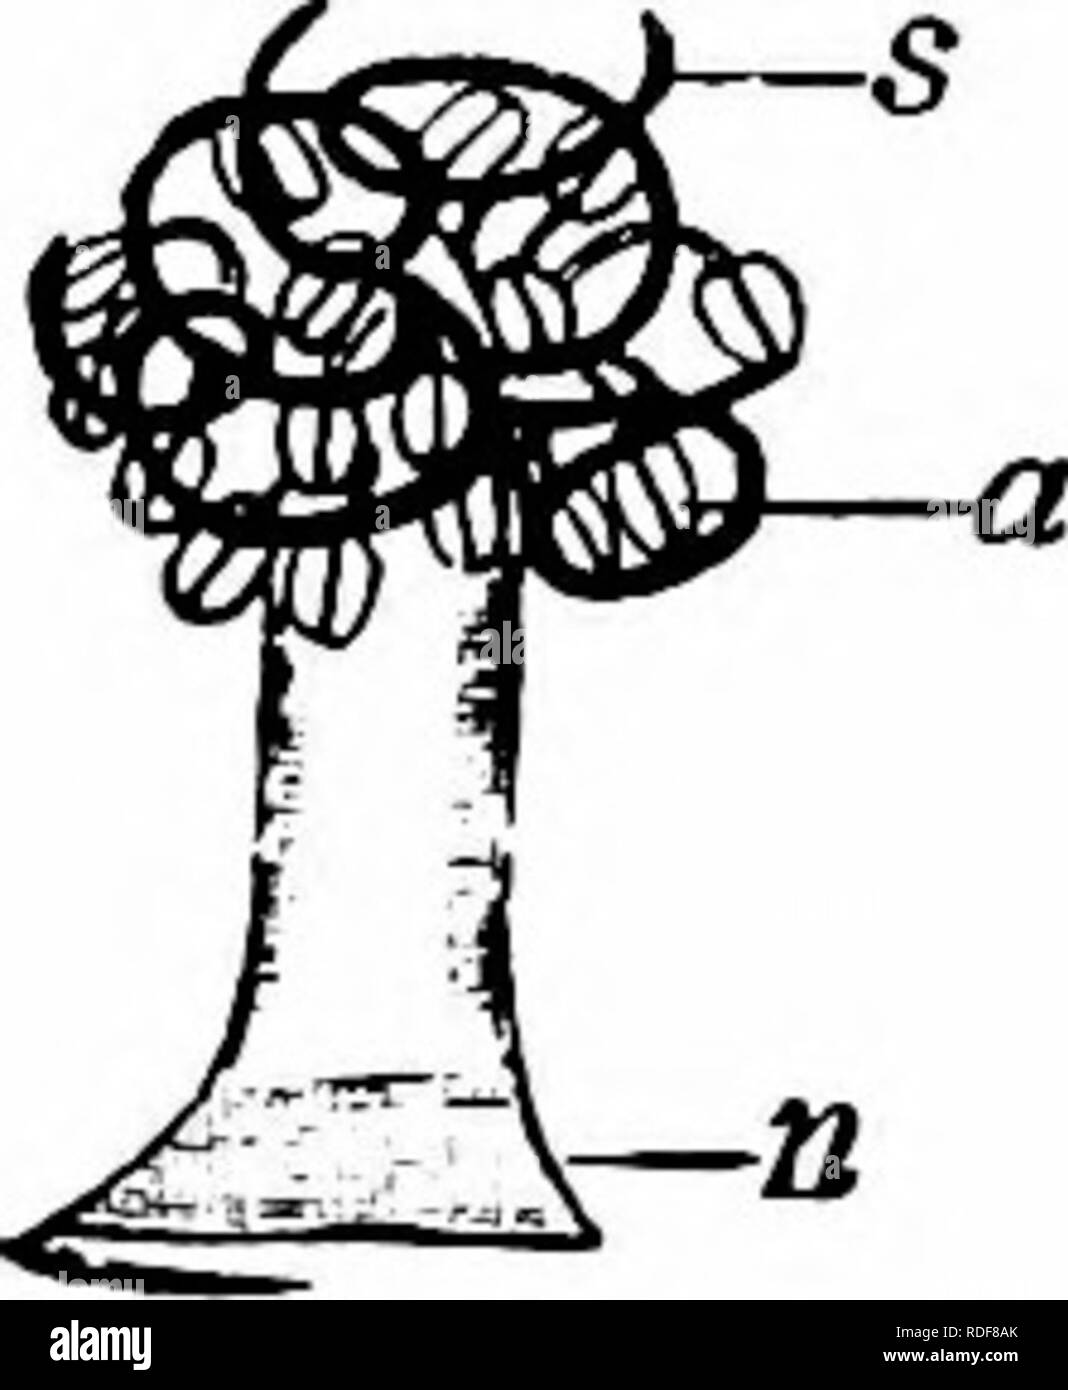 . Handbook of flower pollination : based upon Hermann Mu?ller's work 'The fertilisation of flowers by insects' . Fertilization of plants. MALVACEAE 209 The diameter of the pollen-grains in M. rotundifolia is about 100 ^ in M. neglecta about 112 /x, and in M. sylvestris as much as 144 fi.. In all these species they are closely beset with long spines (Warnstorf). Visitors.—Herm. MuUer observed the following.— A. Hymenoptera. Apidae: i. Anthophora quadrimaculata F. S; 2. Apis mellifica Z. 5; 3. Bombus agrorum F.^; 4. Halictus morio F.i; 5. H. tetrazonius Kl. 5; all skg. B. Hemiptera. 5. Pyrrhoco Stock Photo